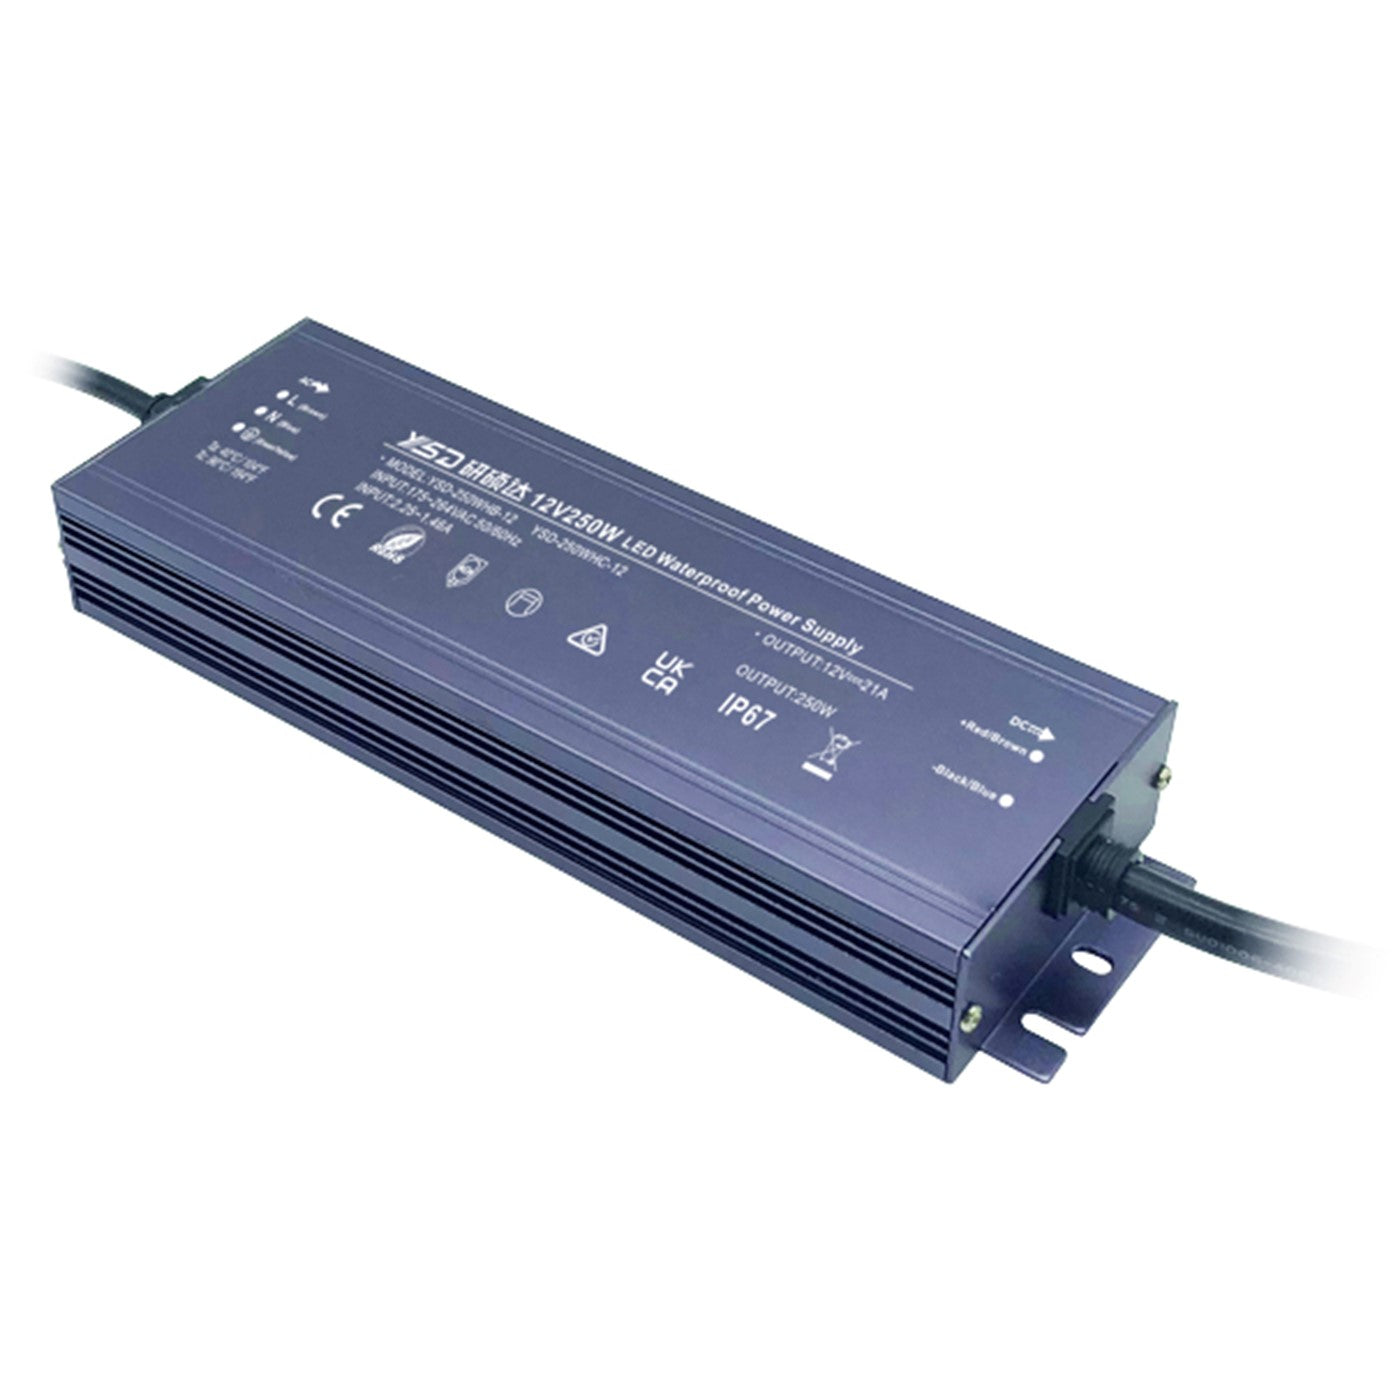 YSD 12vx250w 21a Constant Voltage Waterproof Driver IP67